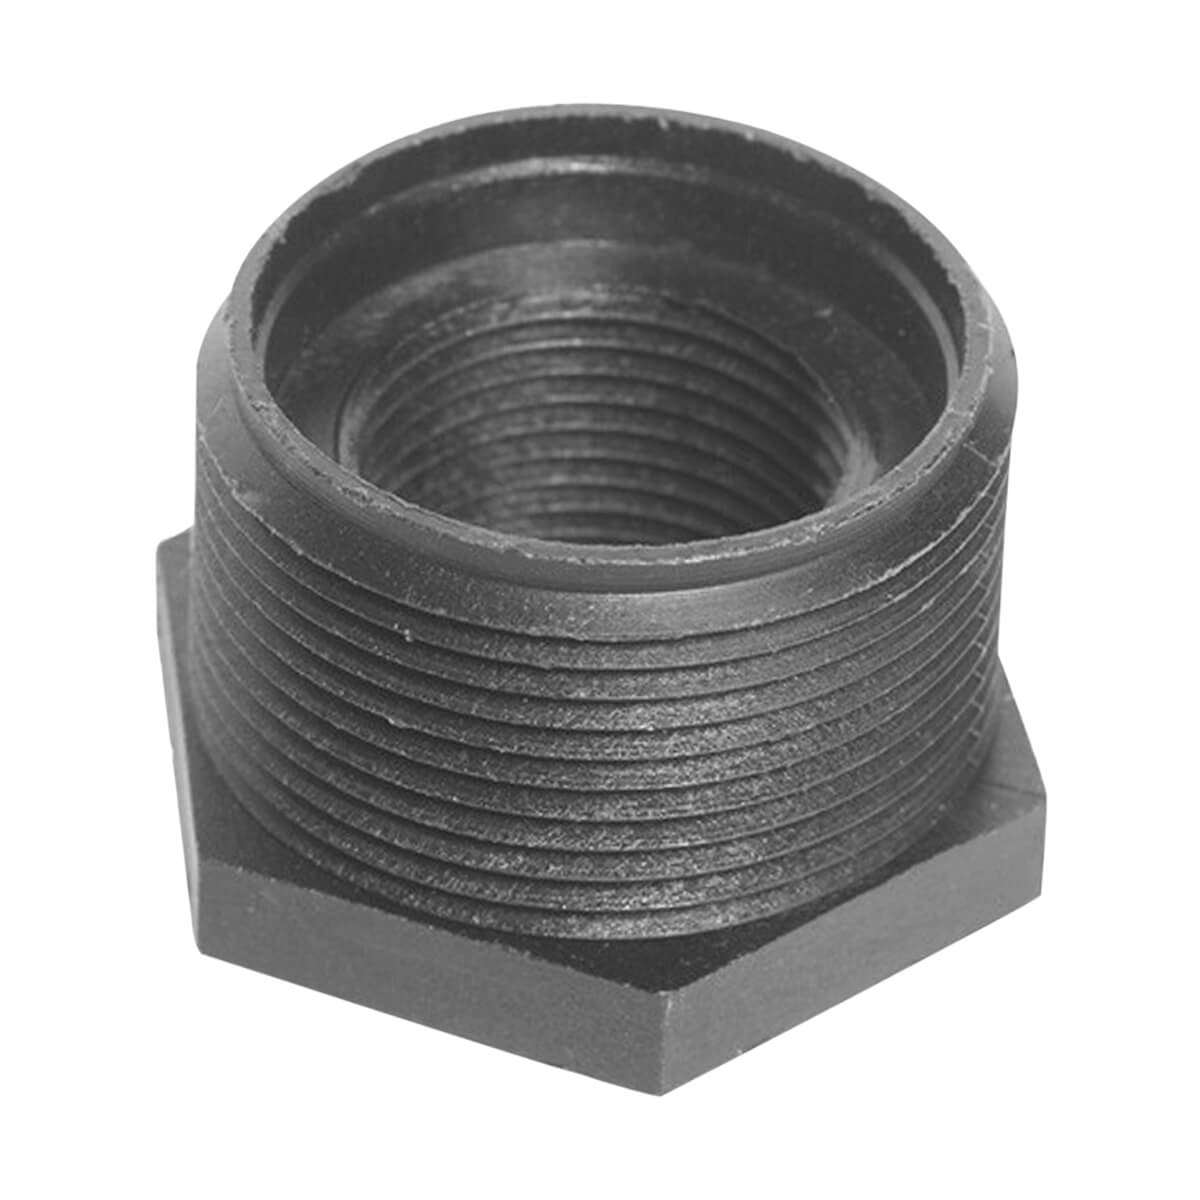 Reducer Bushings MPT x FPT - 2-in x 1-1/4-in